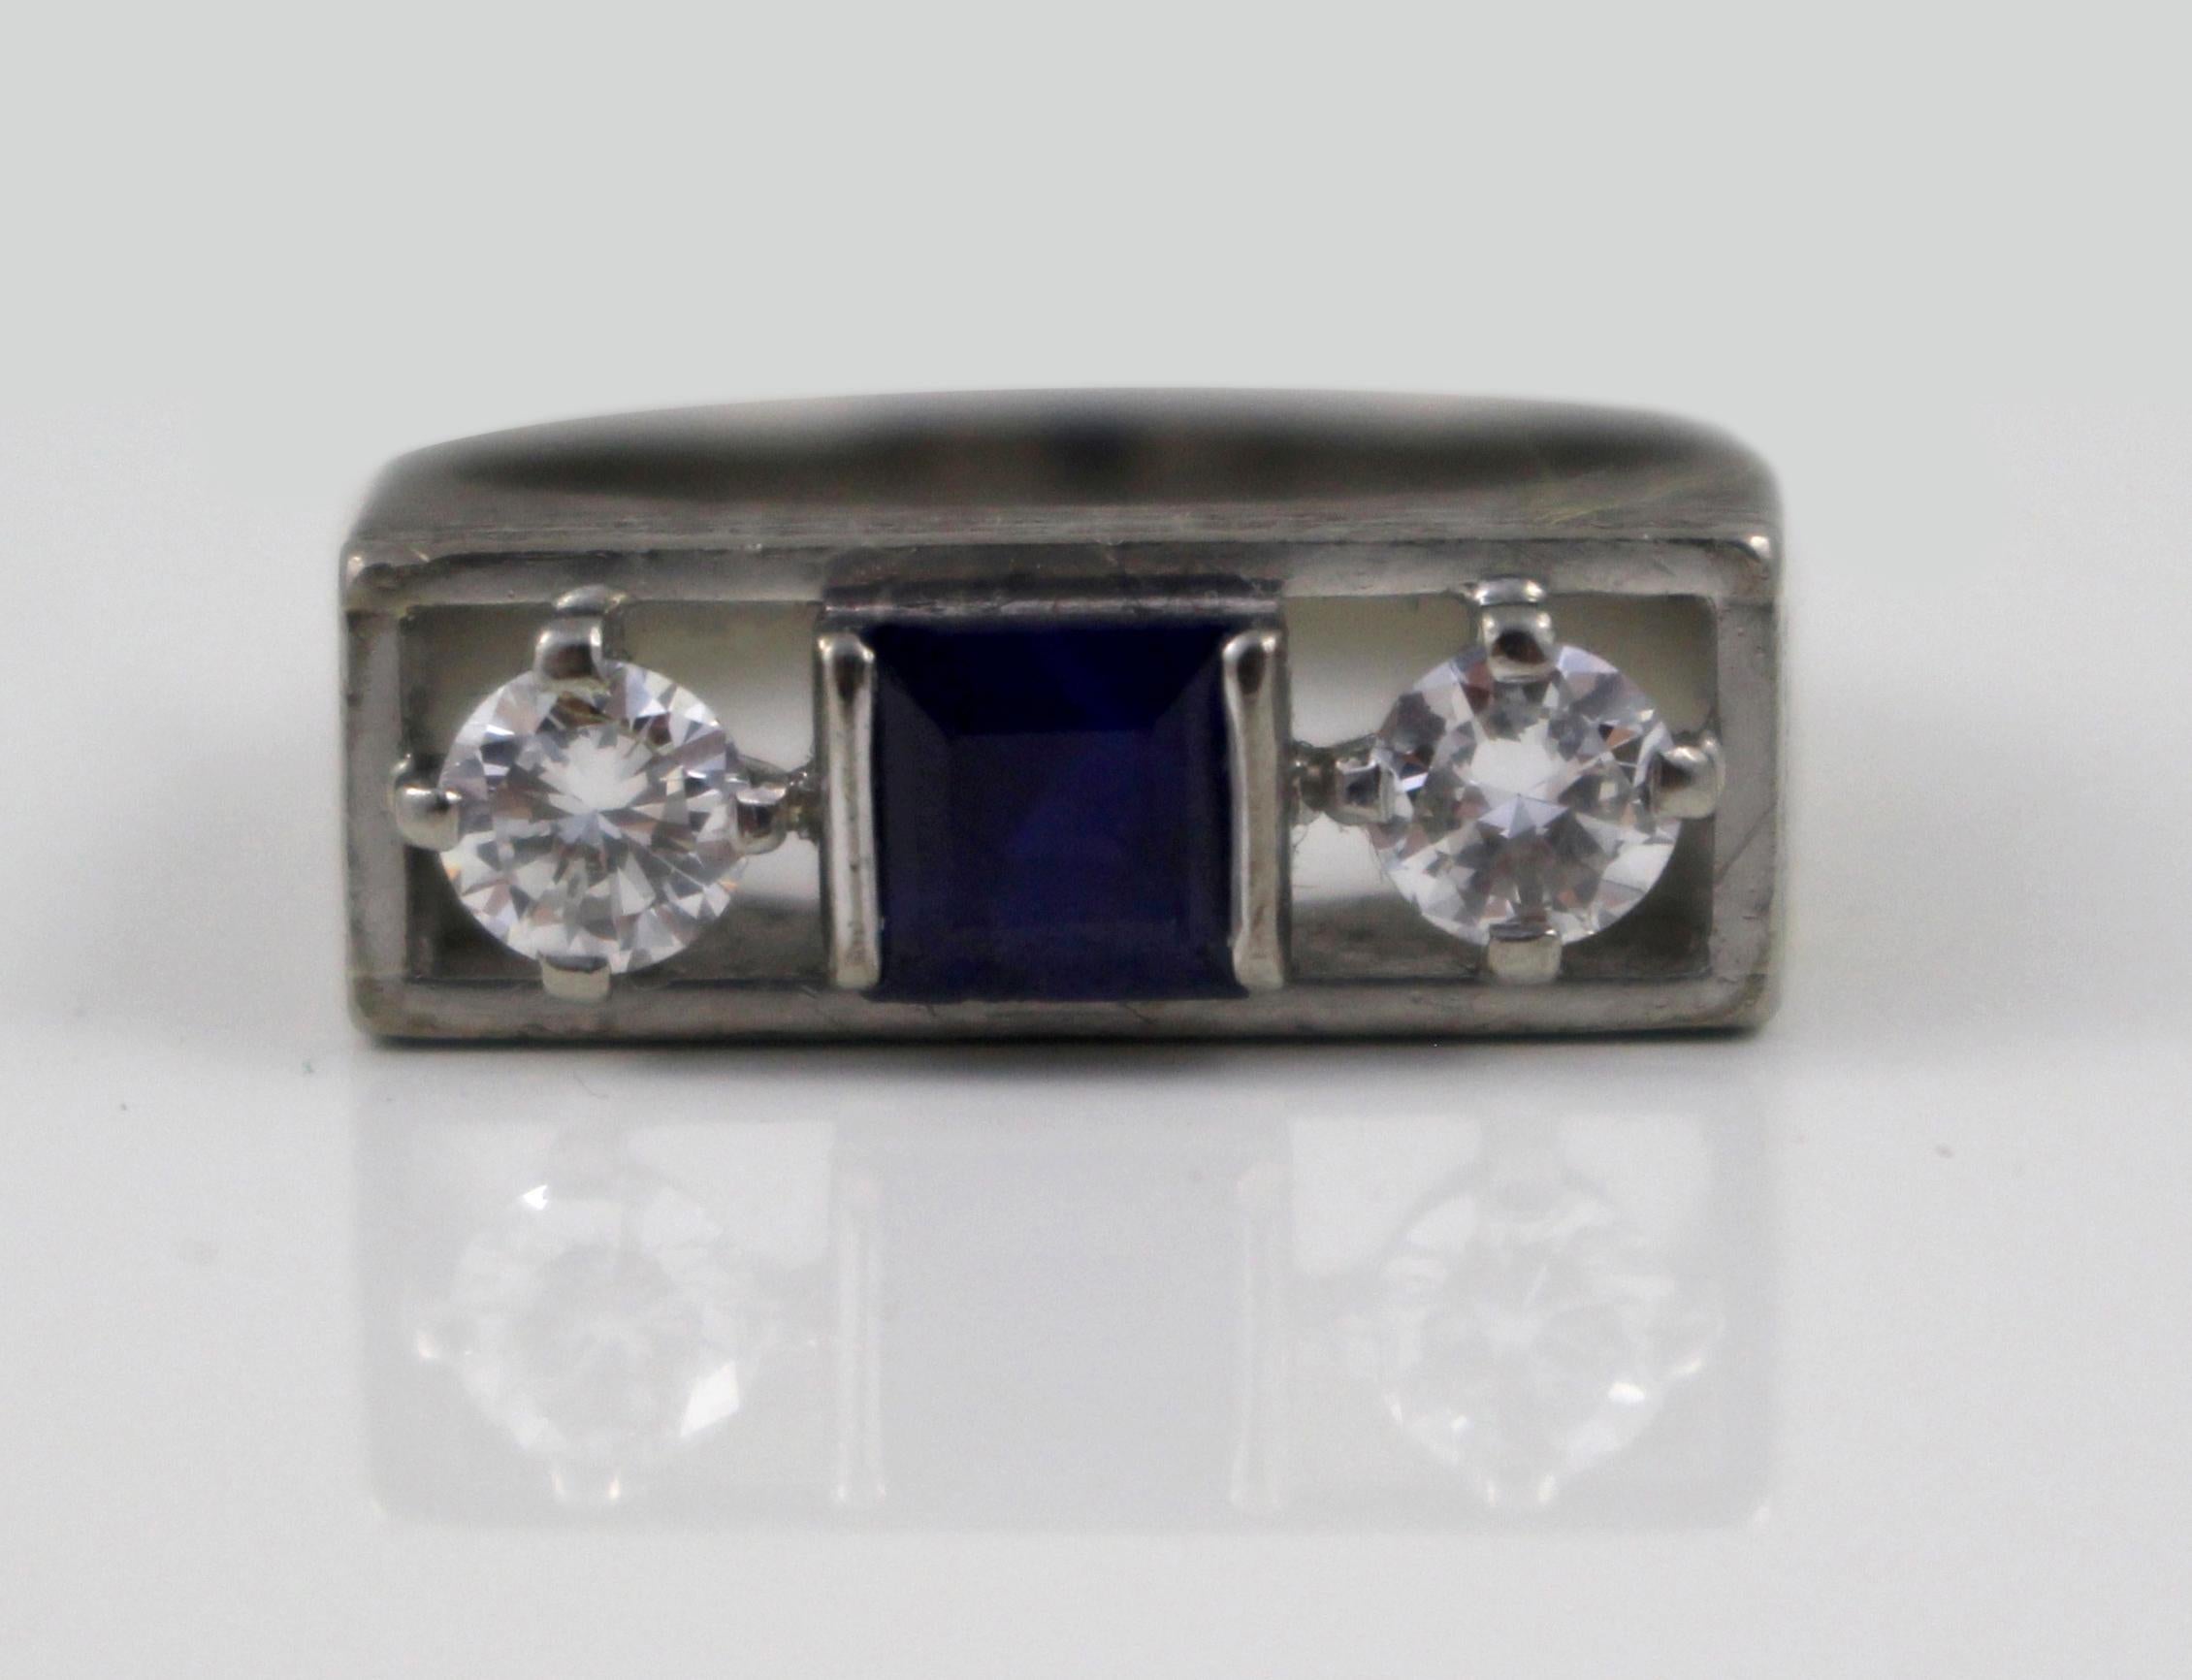 Sapphire & Diamond Art Deco style three stone ring


Stone Sapphire & diamonds

Sapphire Square step cut blue sapphire, measuring 4.67 x 4.6 x 3.25 mm. Estimated weight 0.70 metric carat, medium blue in colour, included with some colour